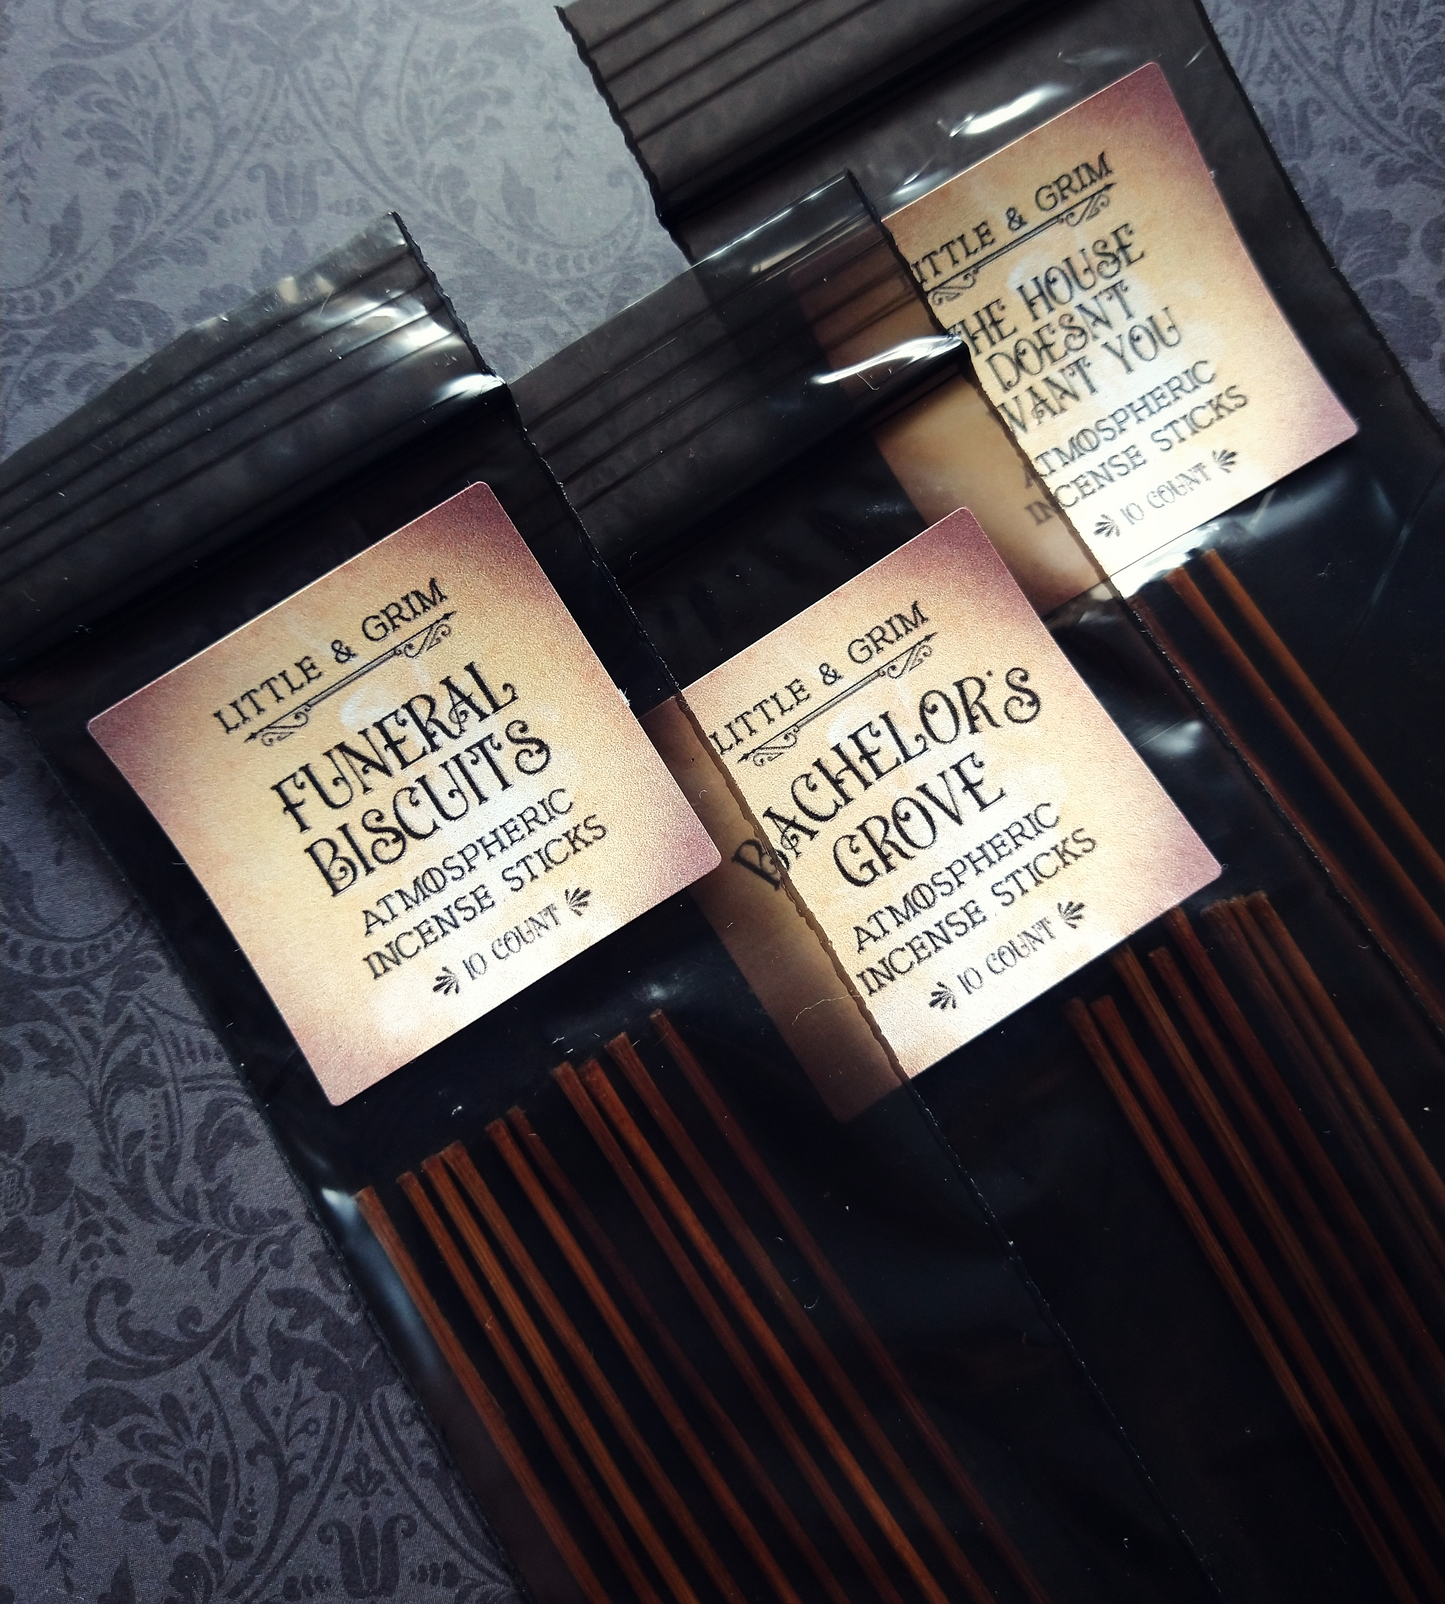 Three bags of Little and Grim incense, presented in black bags with labels bearing the scent names: "Funeral Biscuits", "Bachelor's Grove", and "The House Doesn't Want You."